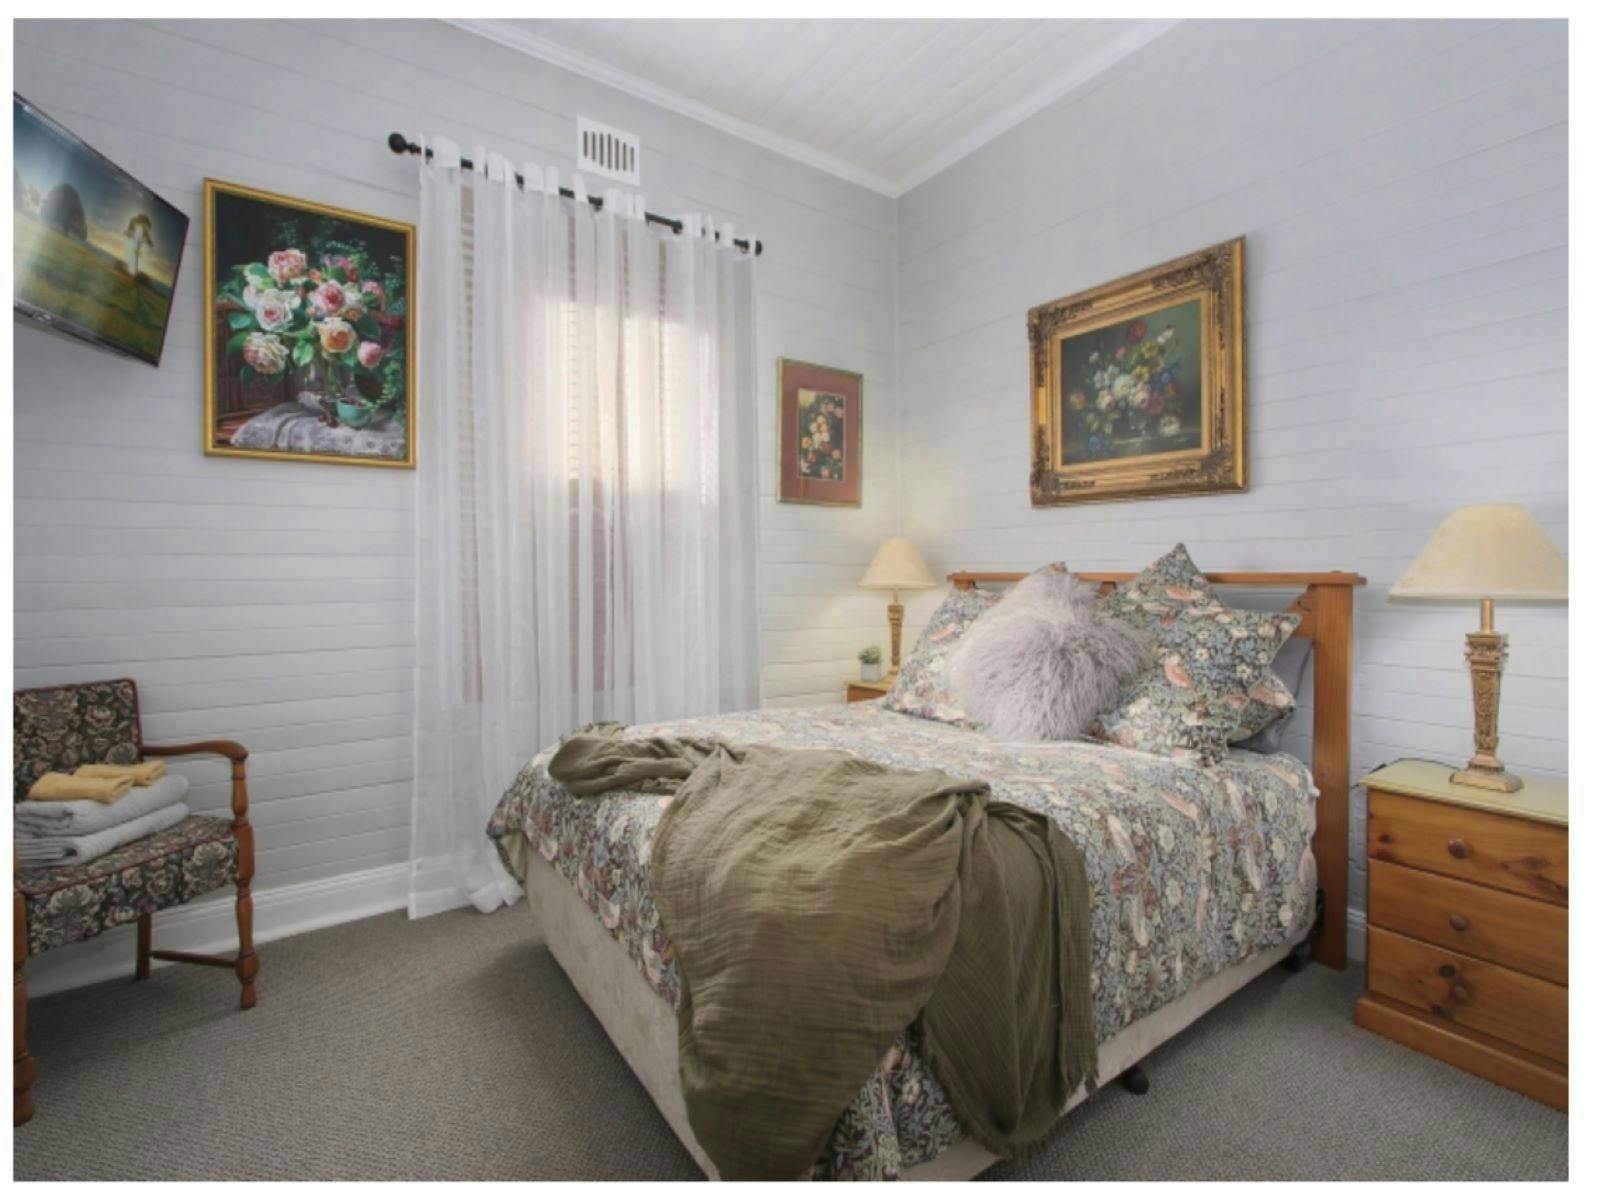 Bedroom, double bed with floral linin, wooden bedside table, television and a seat.